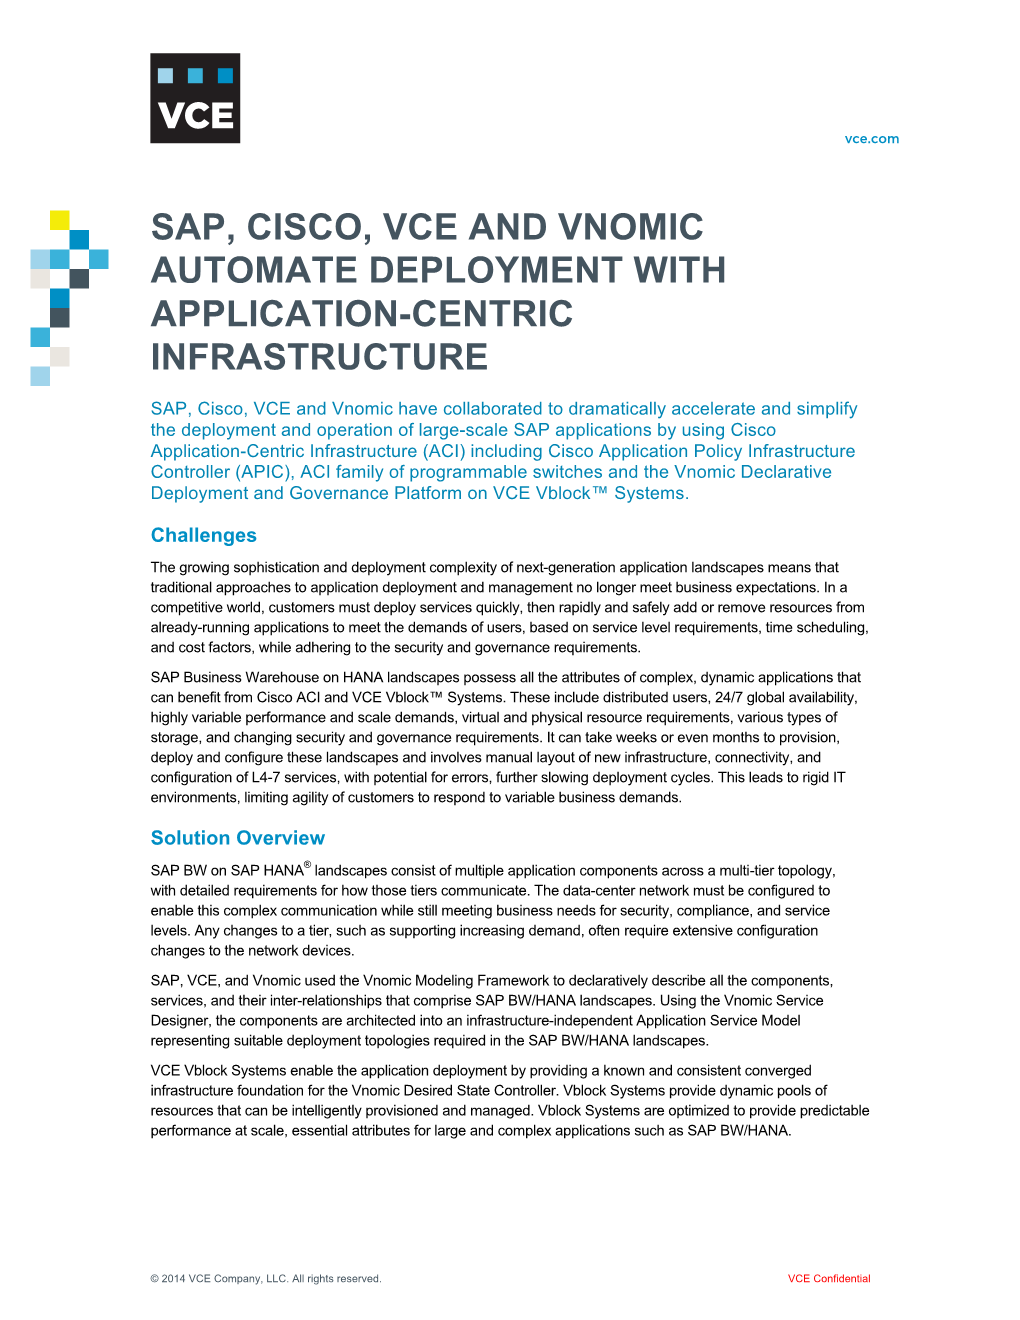 Sap, Cisco, Vce and Vnomic Automate Deployment with Application-Centric Infrastructure